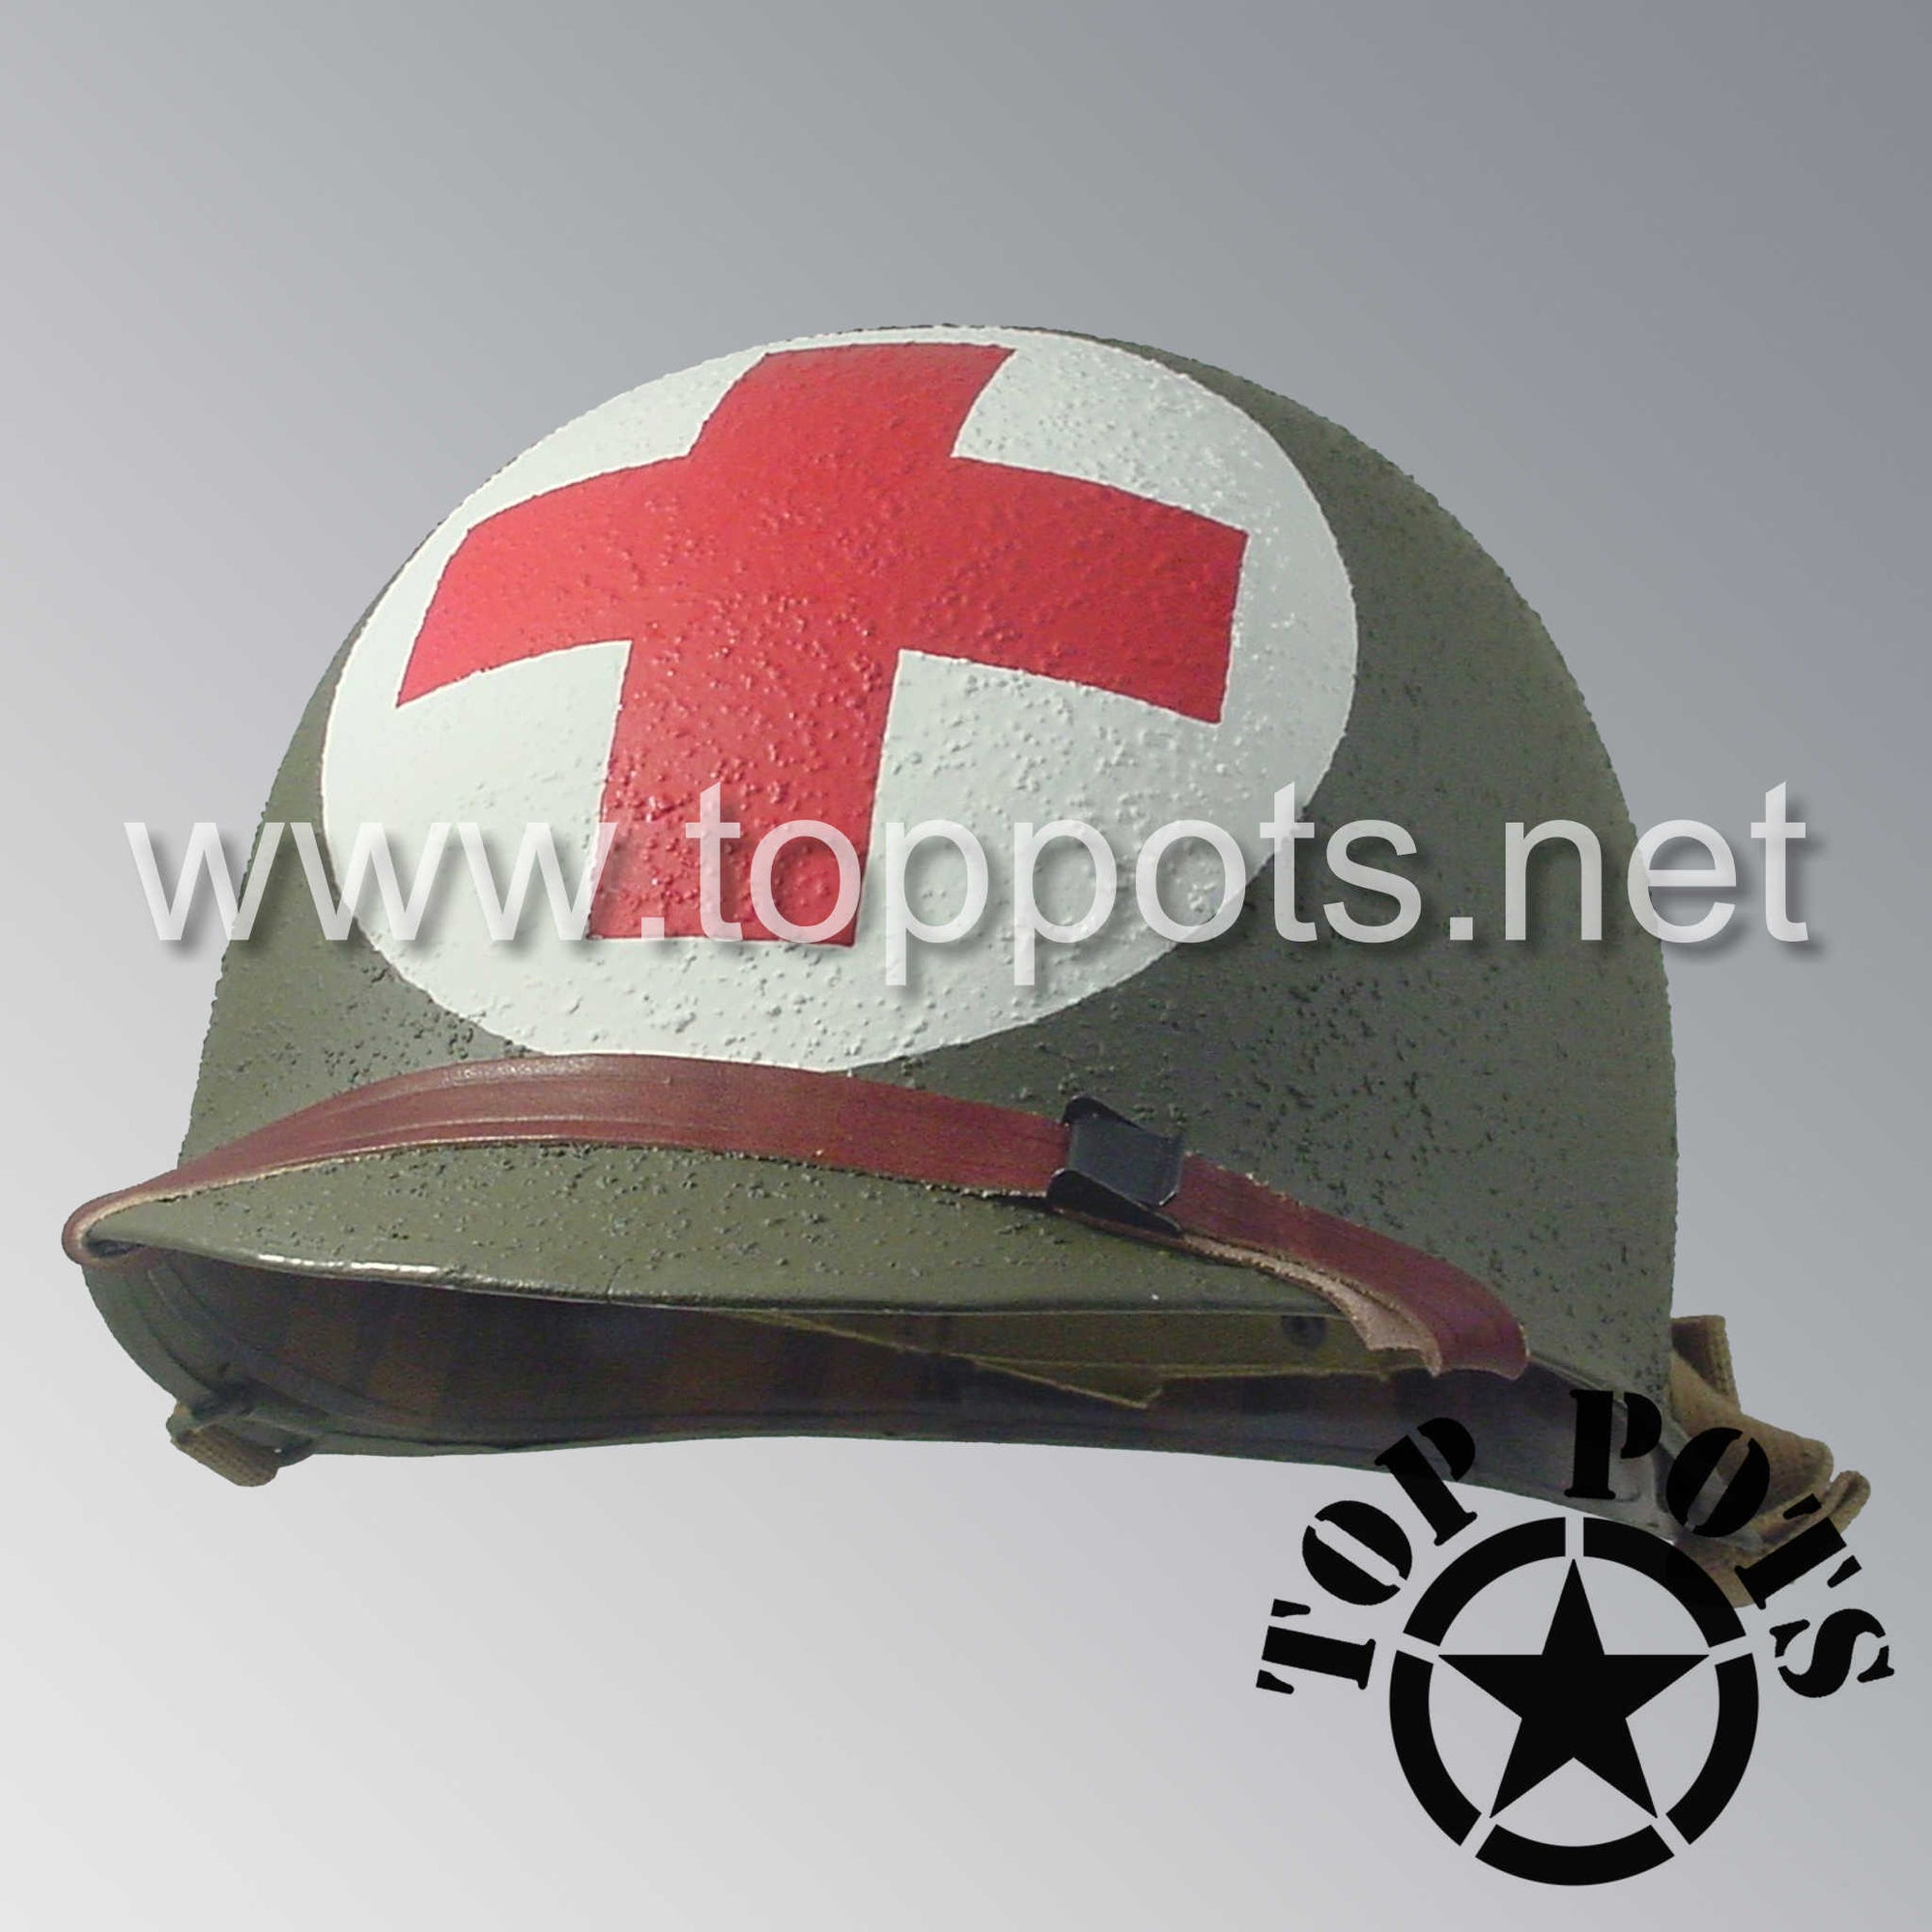 WWII US Army Restored Original M1 Infantry Helmet Swivel Bale Shell and Liner with 2nd Ranger Medic Emblem